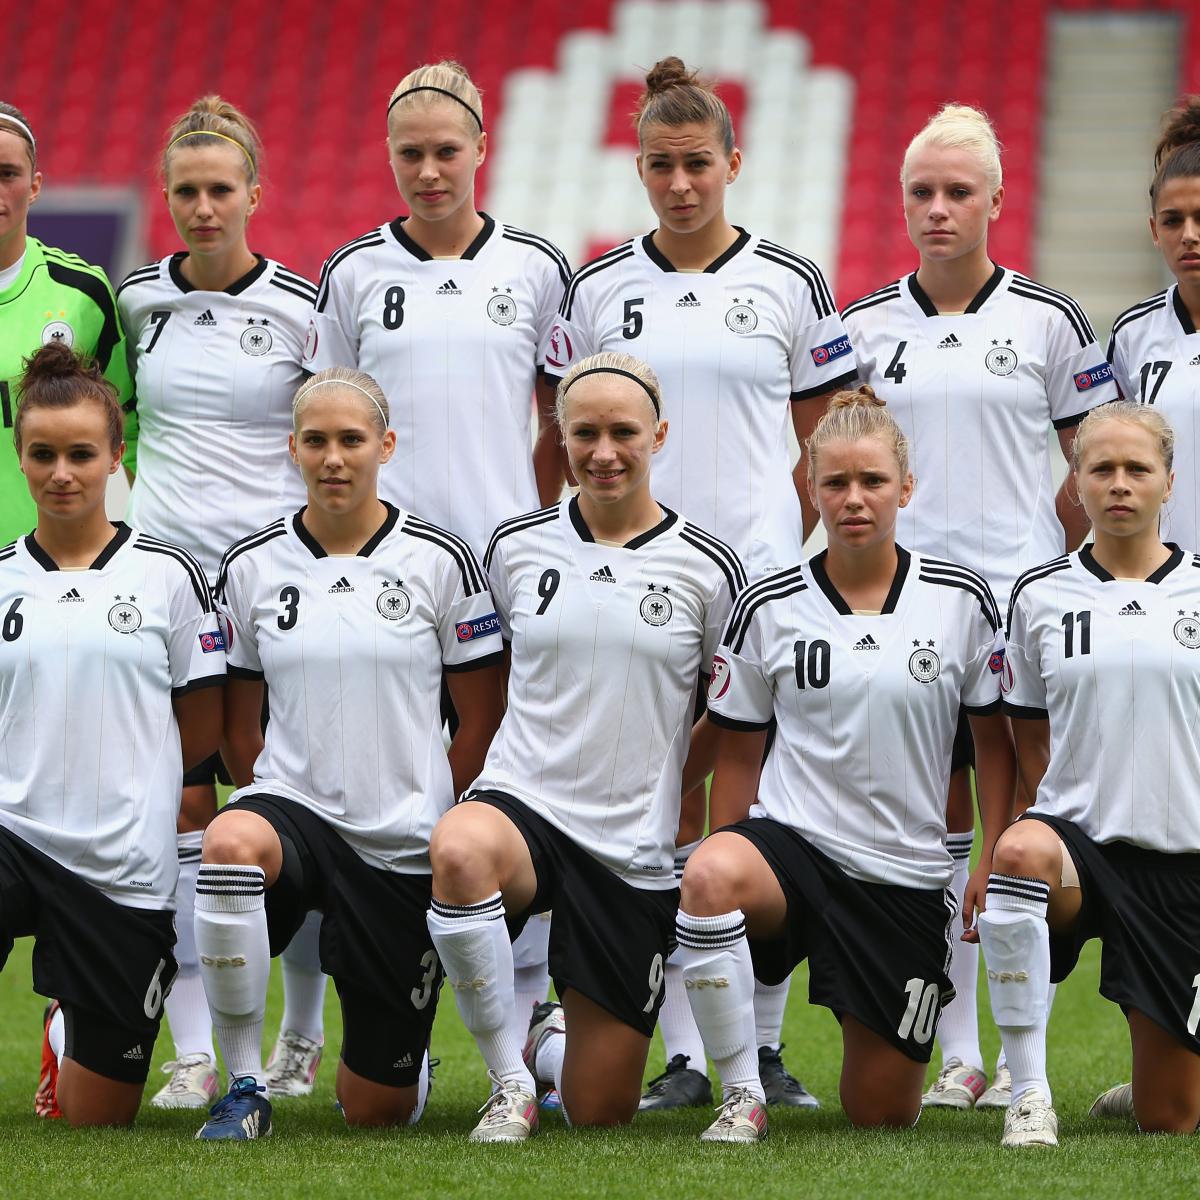 2015 Women's World Cup Qualifying Teams That Will Dominate Their Group